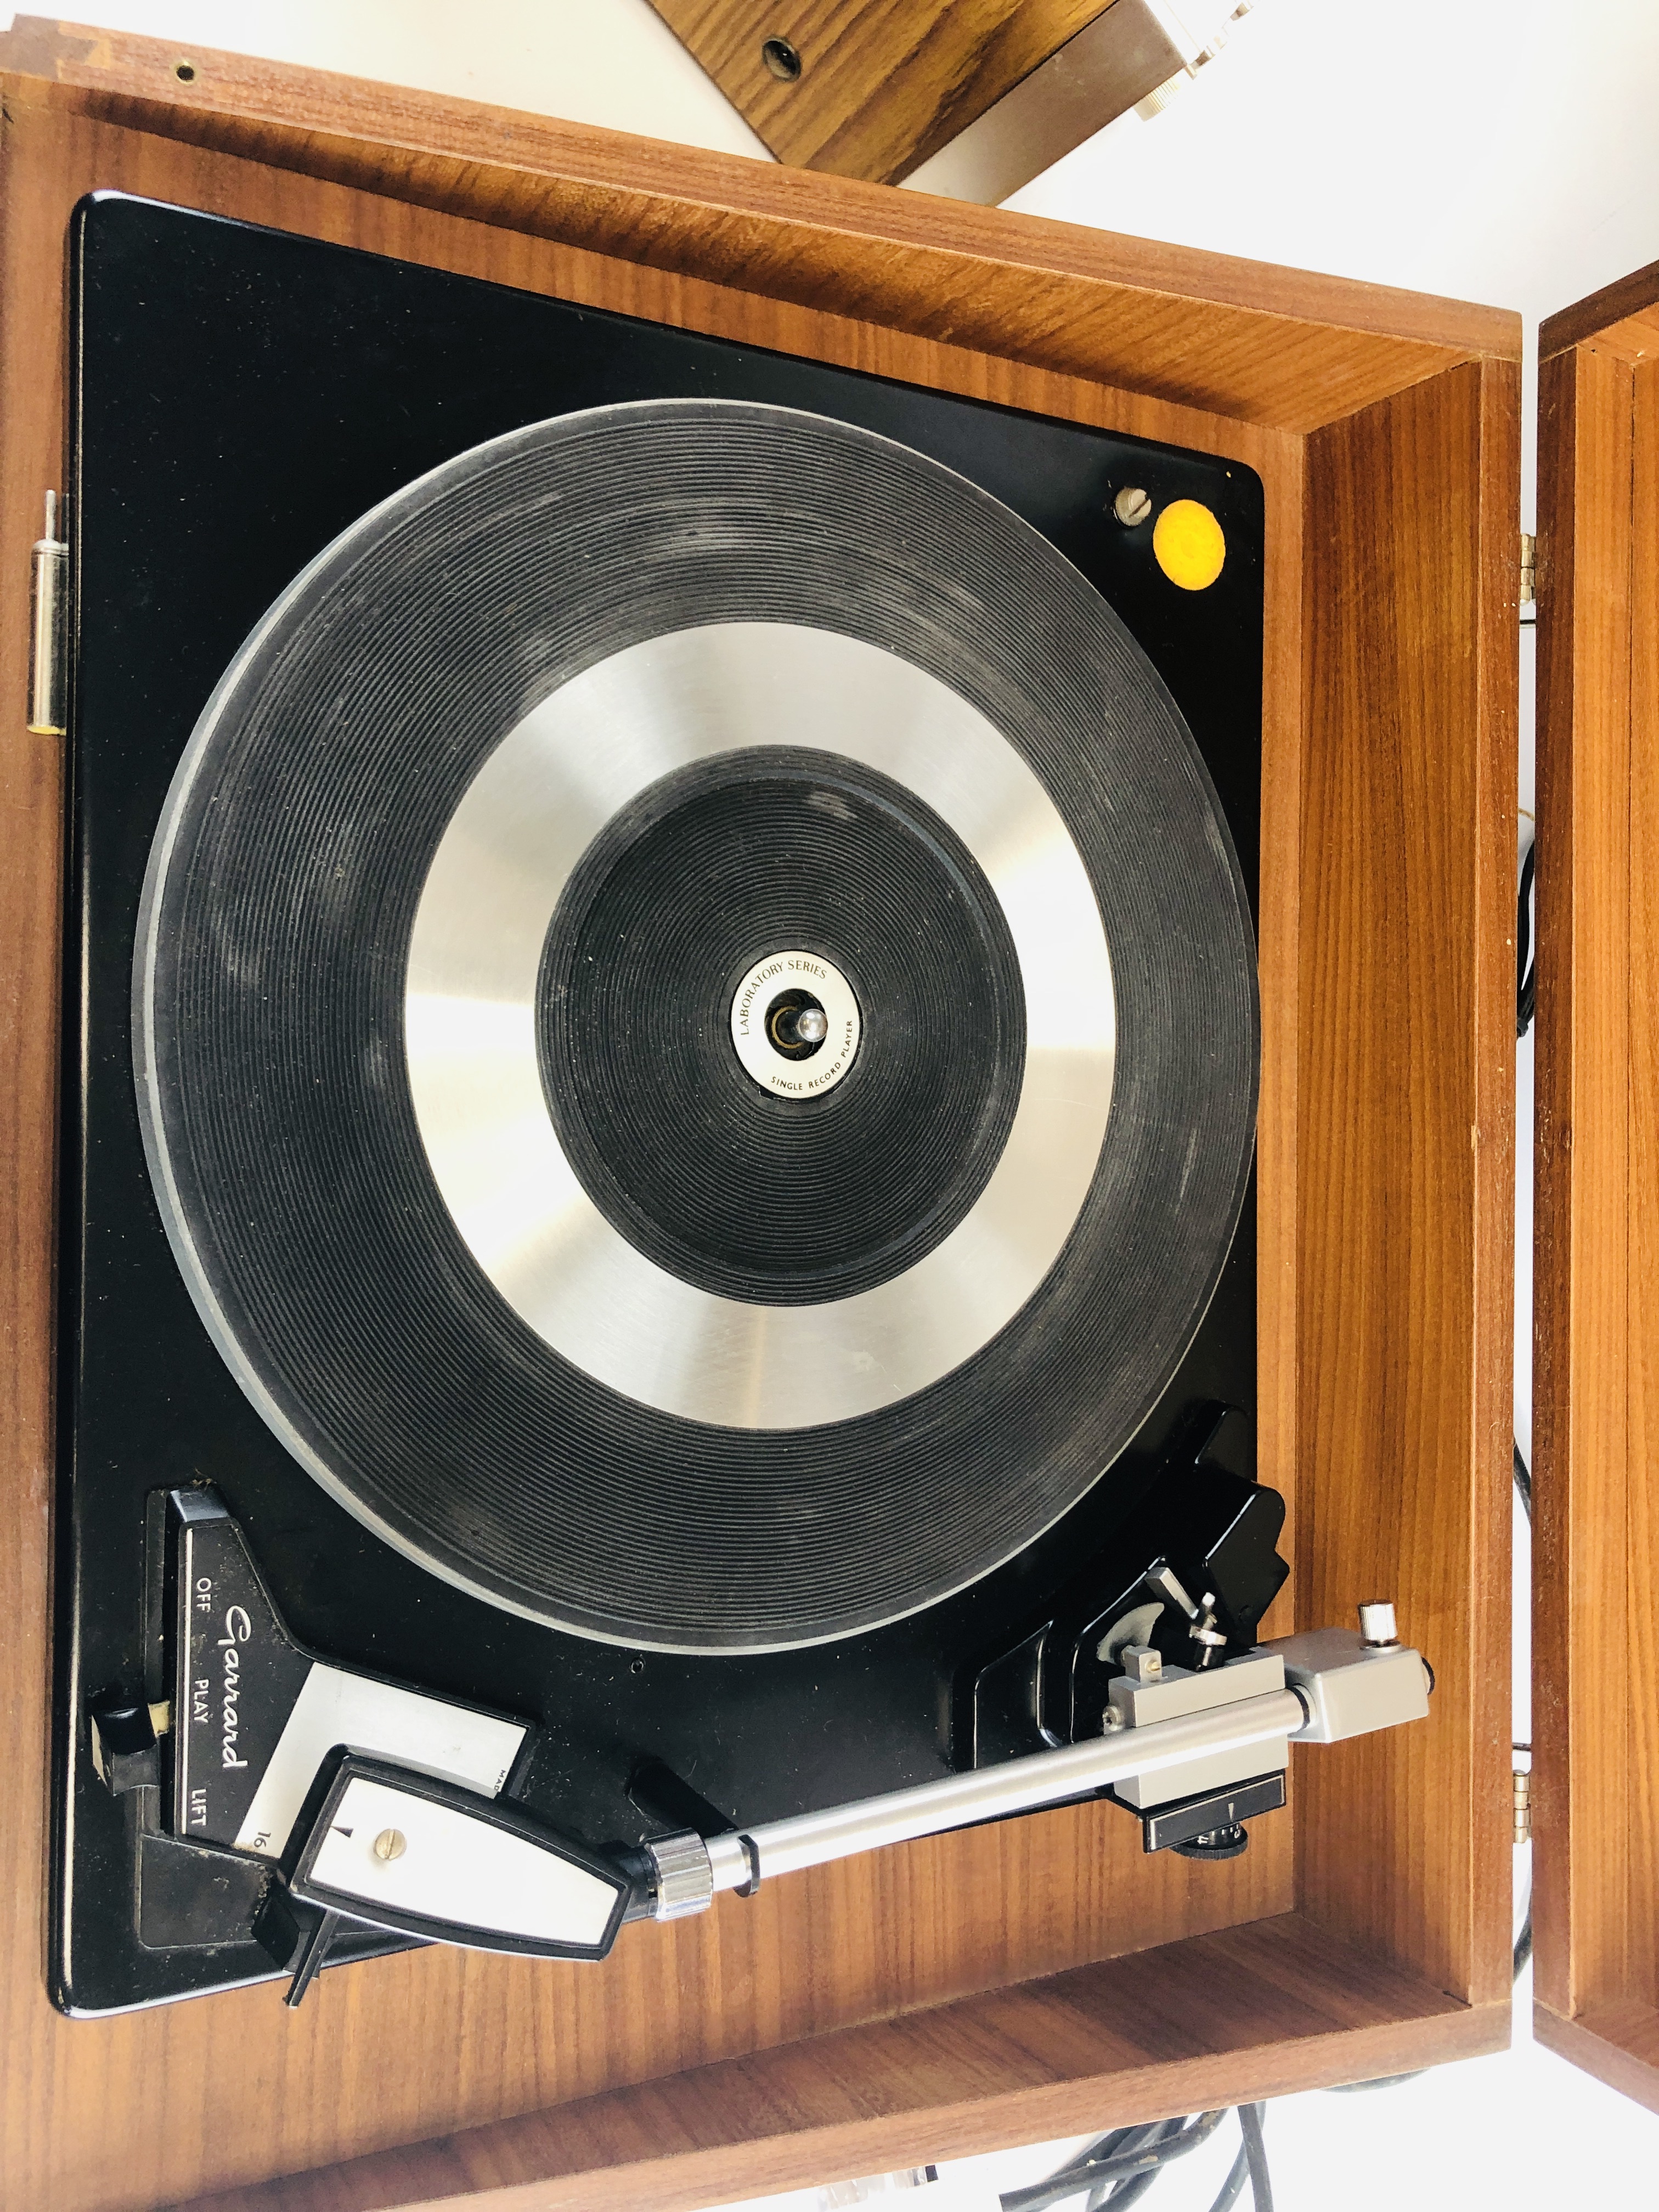 A GOODMANS GARARD MUSIC SWEET RECORD PLAYER MODEL 3025 ALONG WITH TWO PIECES OF ROTEL AUDIO - Image 5 of 8